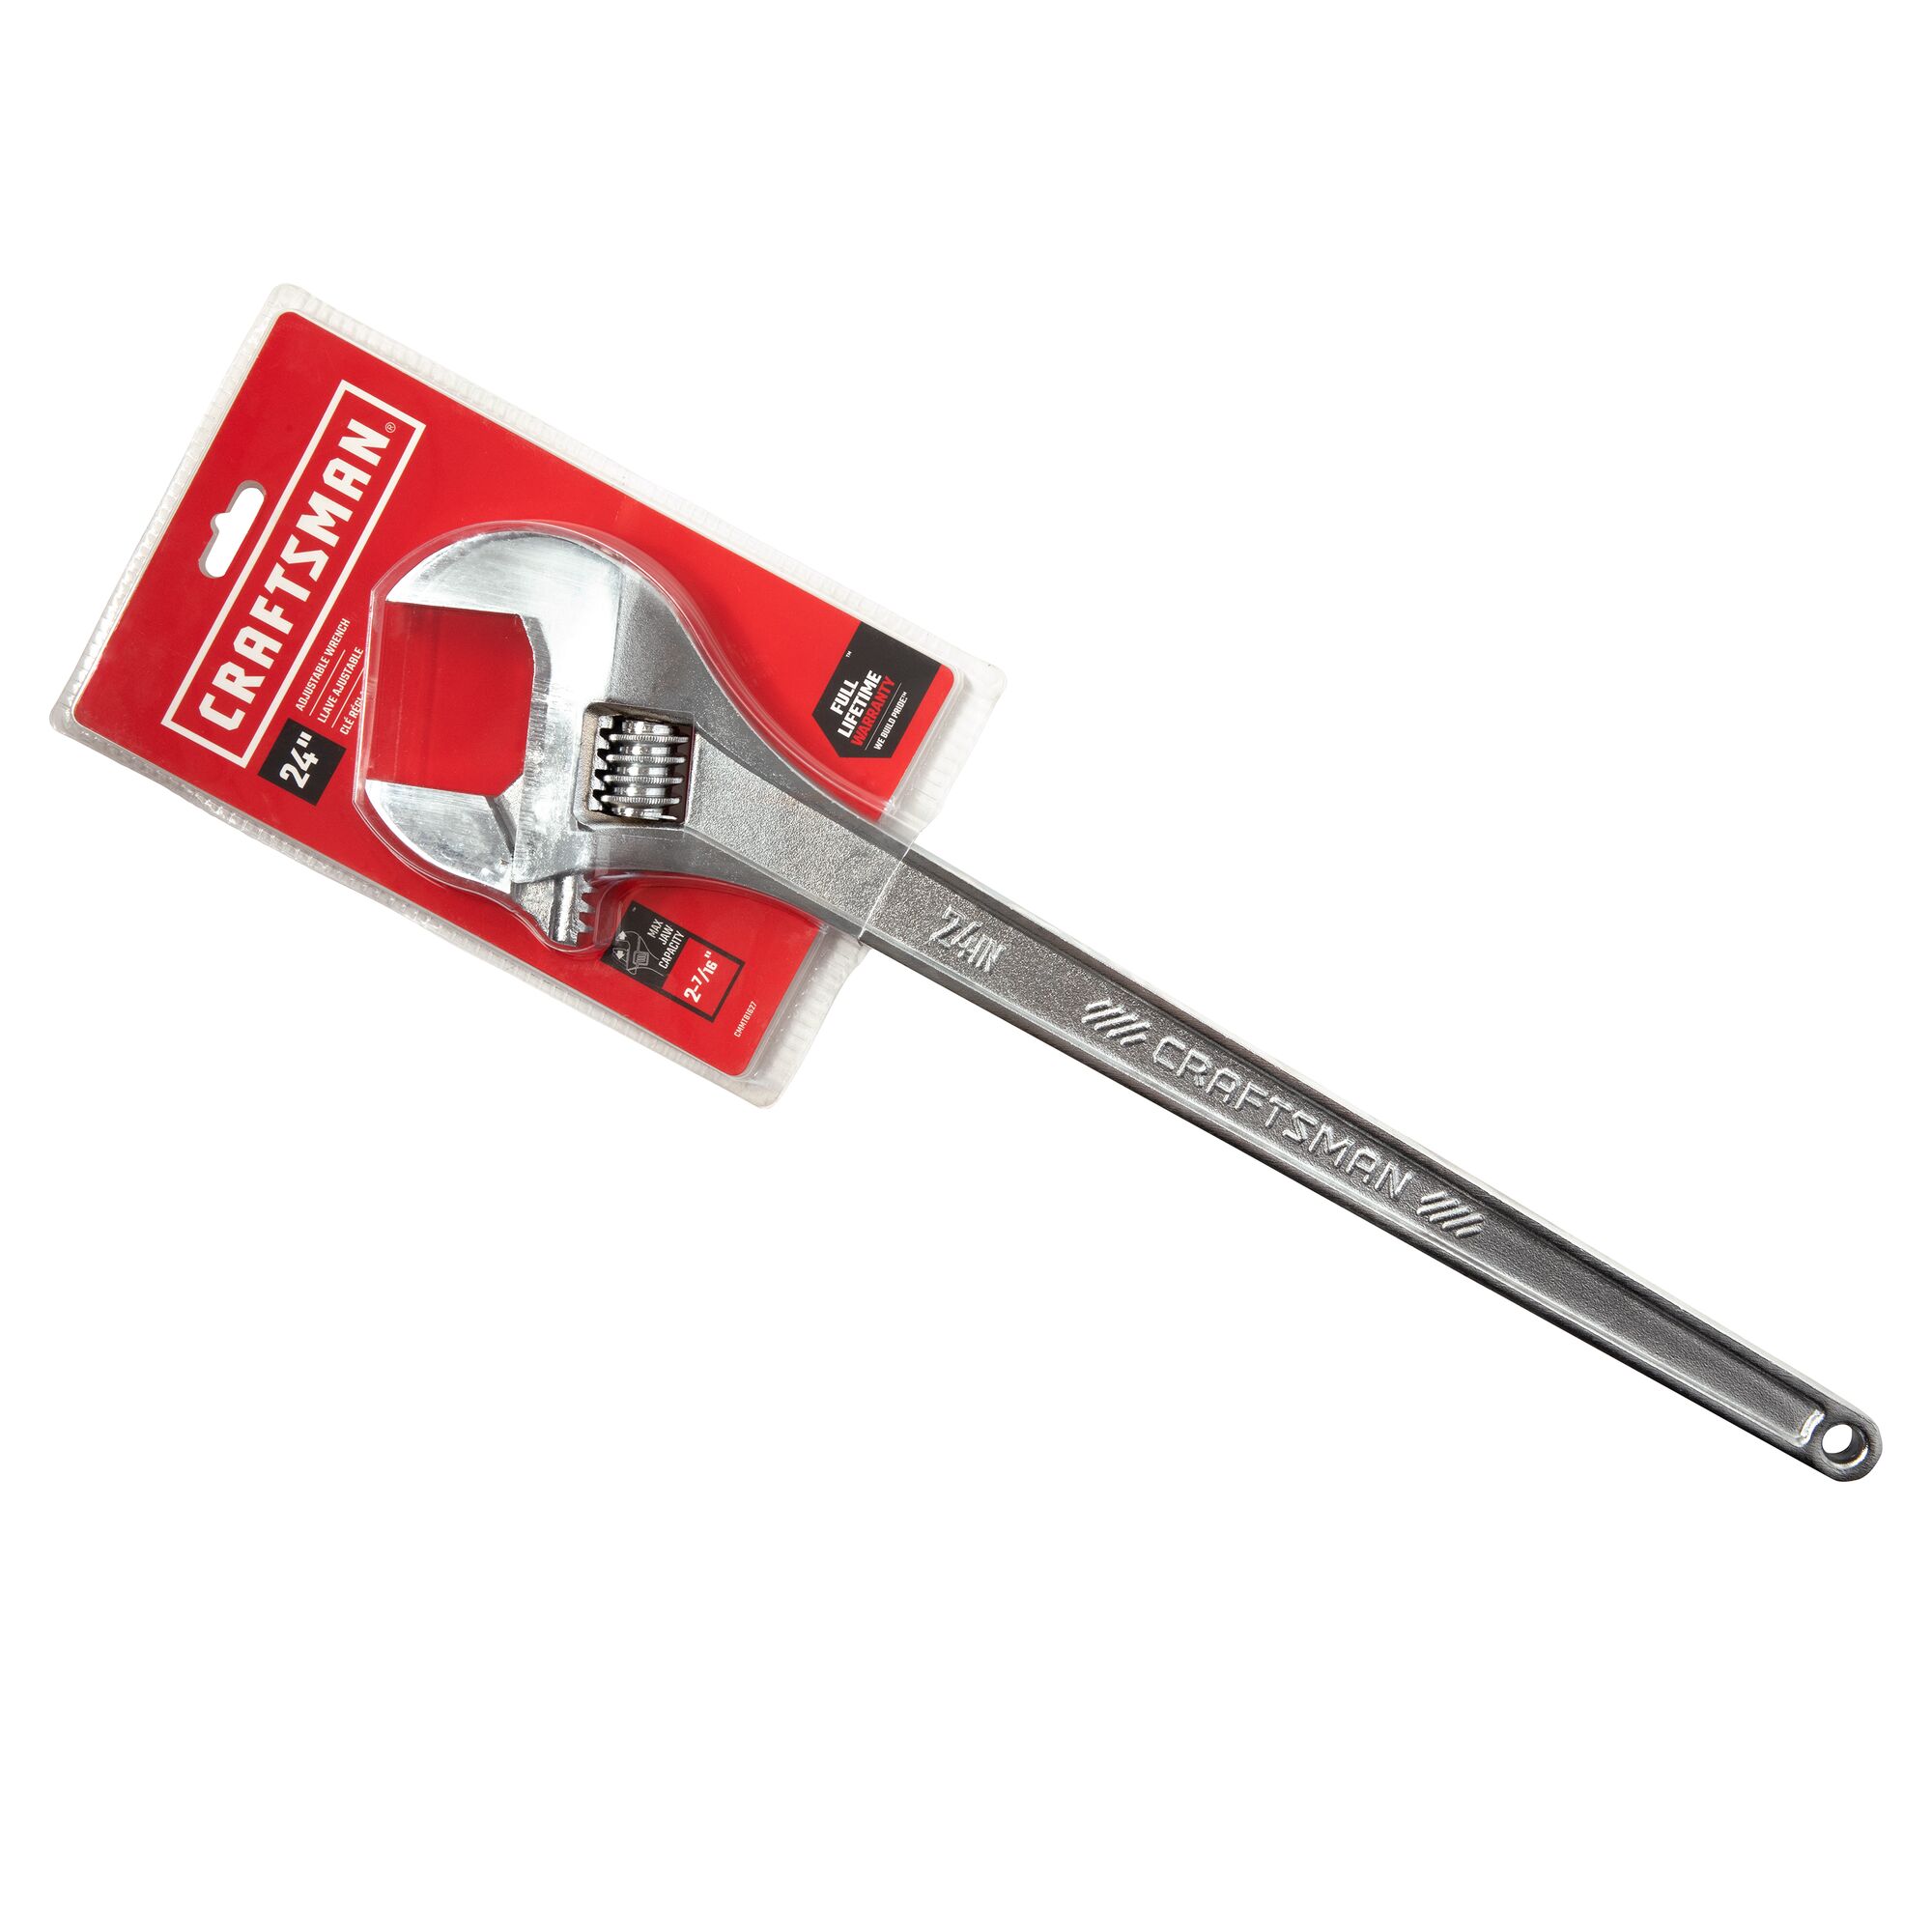 View of CRAFTSMAN Wrenches: Adjustable packaging